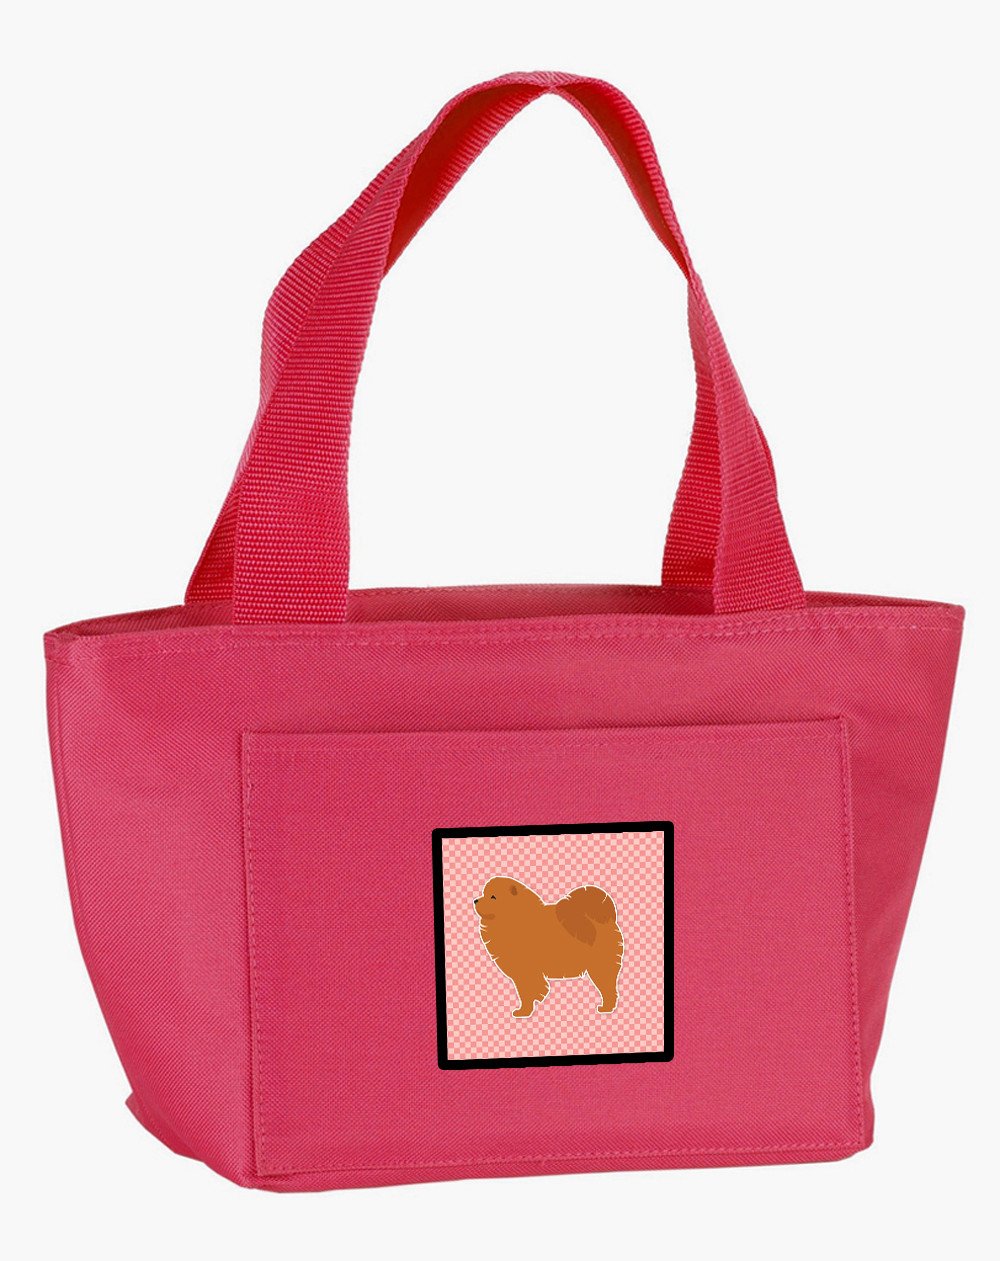 Chow Chow Checkerboard Pink Lunch Bag BB3651PK-8808 by Caroline's Treasures